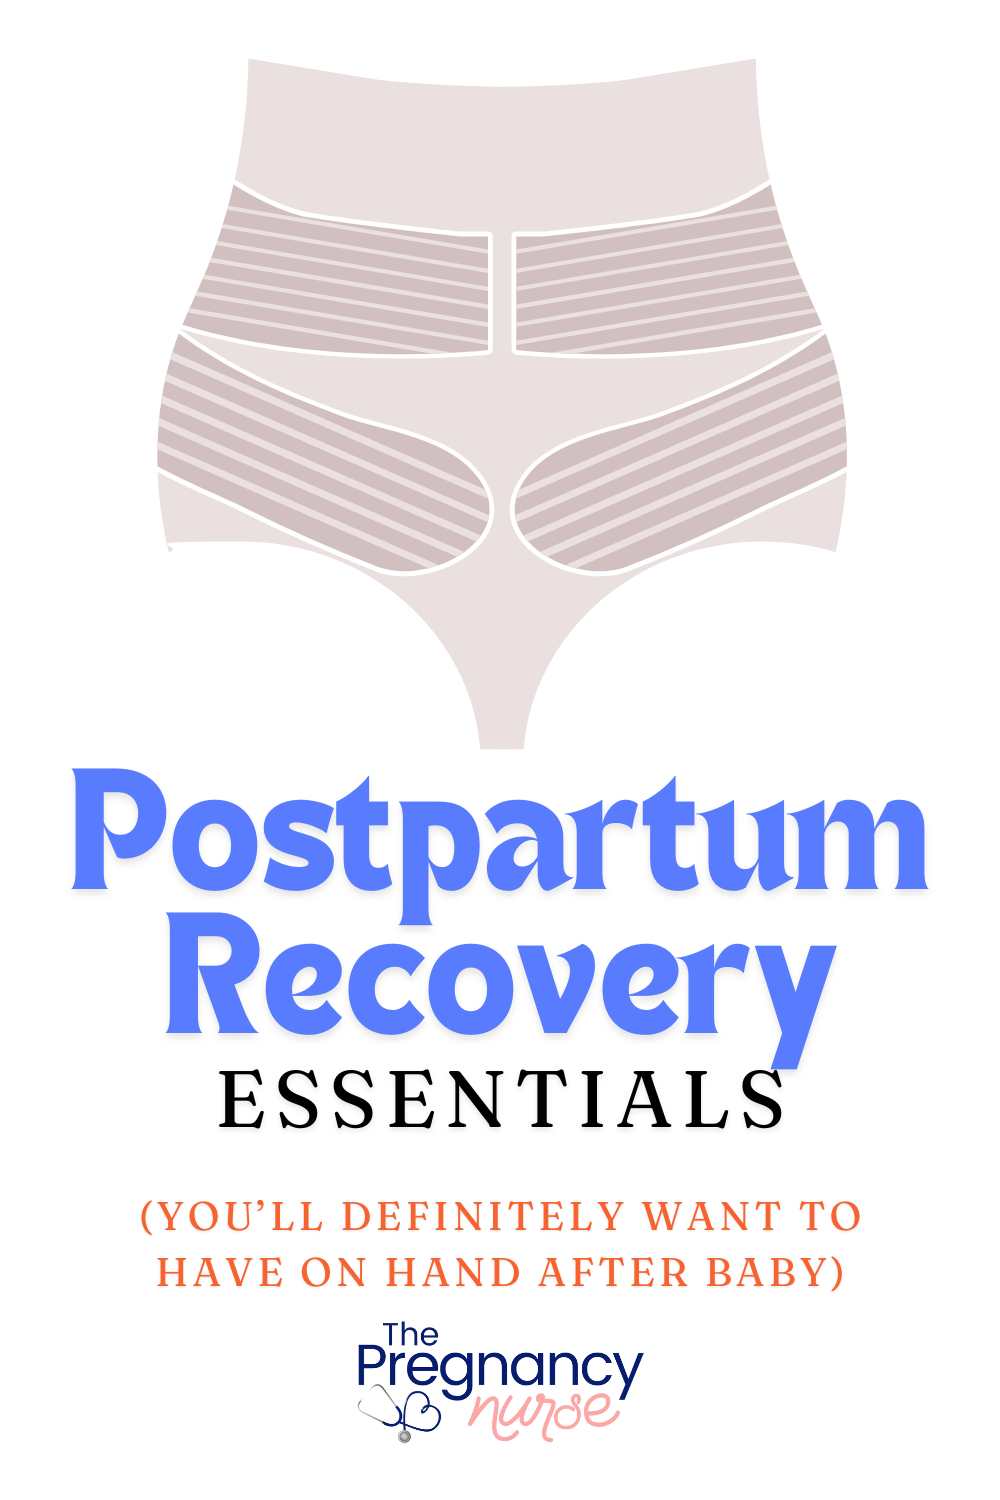 Want to bounce back after baby? Our go-to guide for postpartum essentials will ensure you're prepped for a smoother recovery. From medications to maternity wear, your comfort is our priority. Don't forget to click for the full list of must-haves!